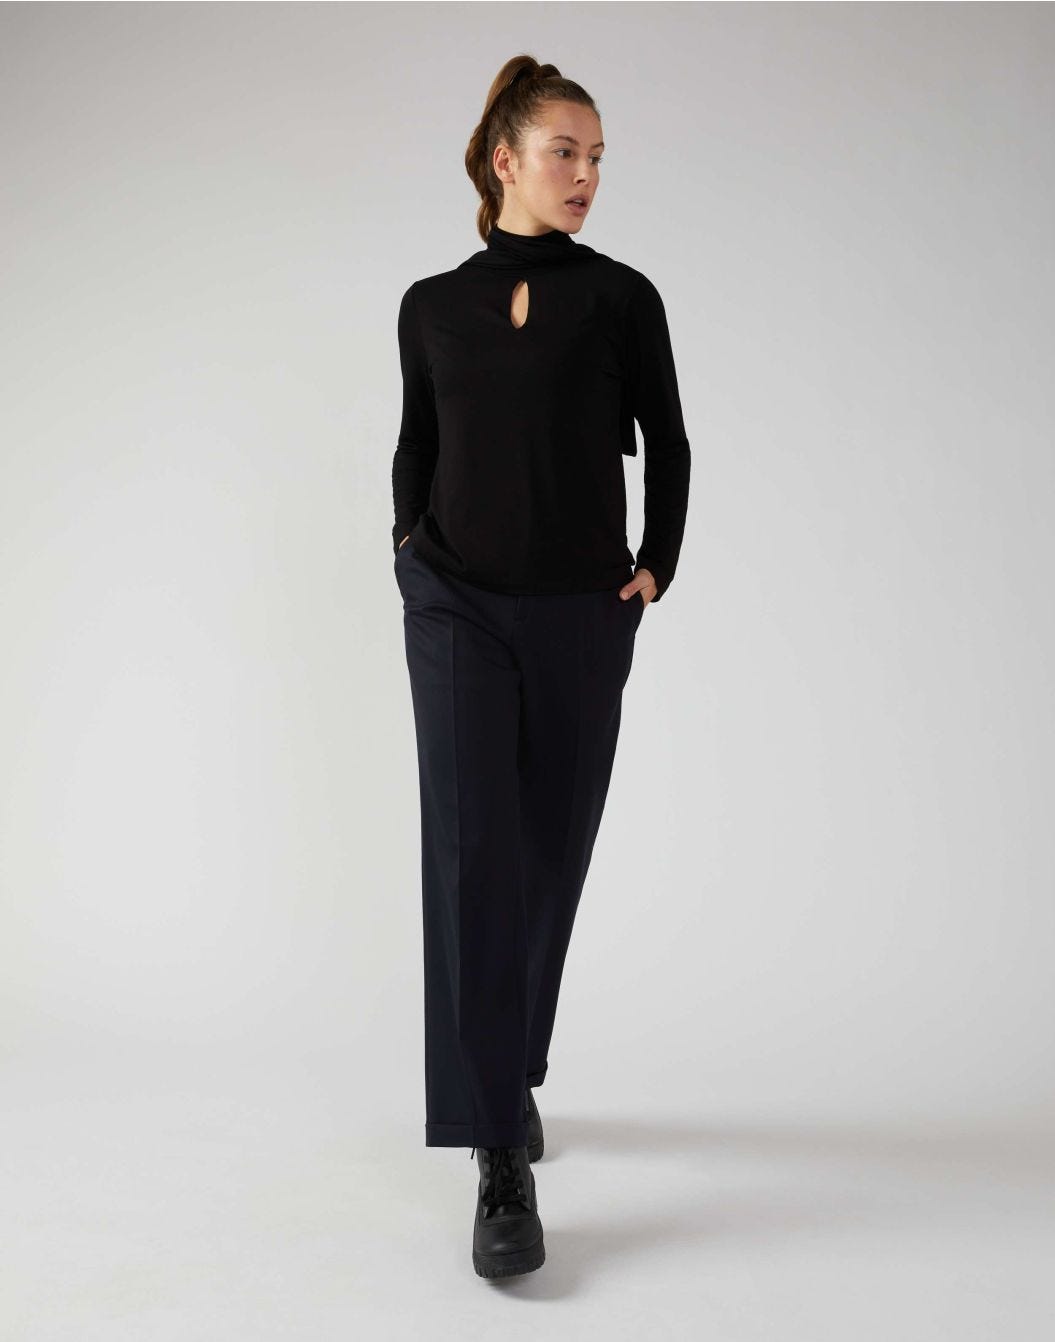 Black top in viscose jersey with bow detail and keyhole neckline